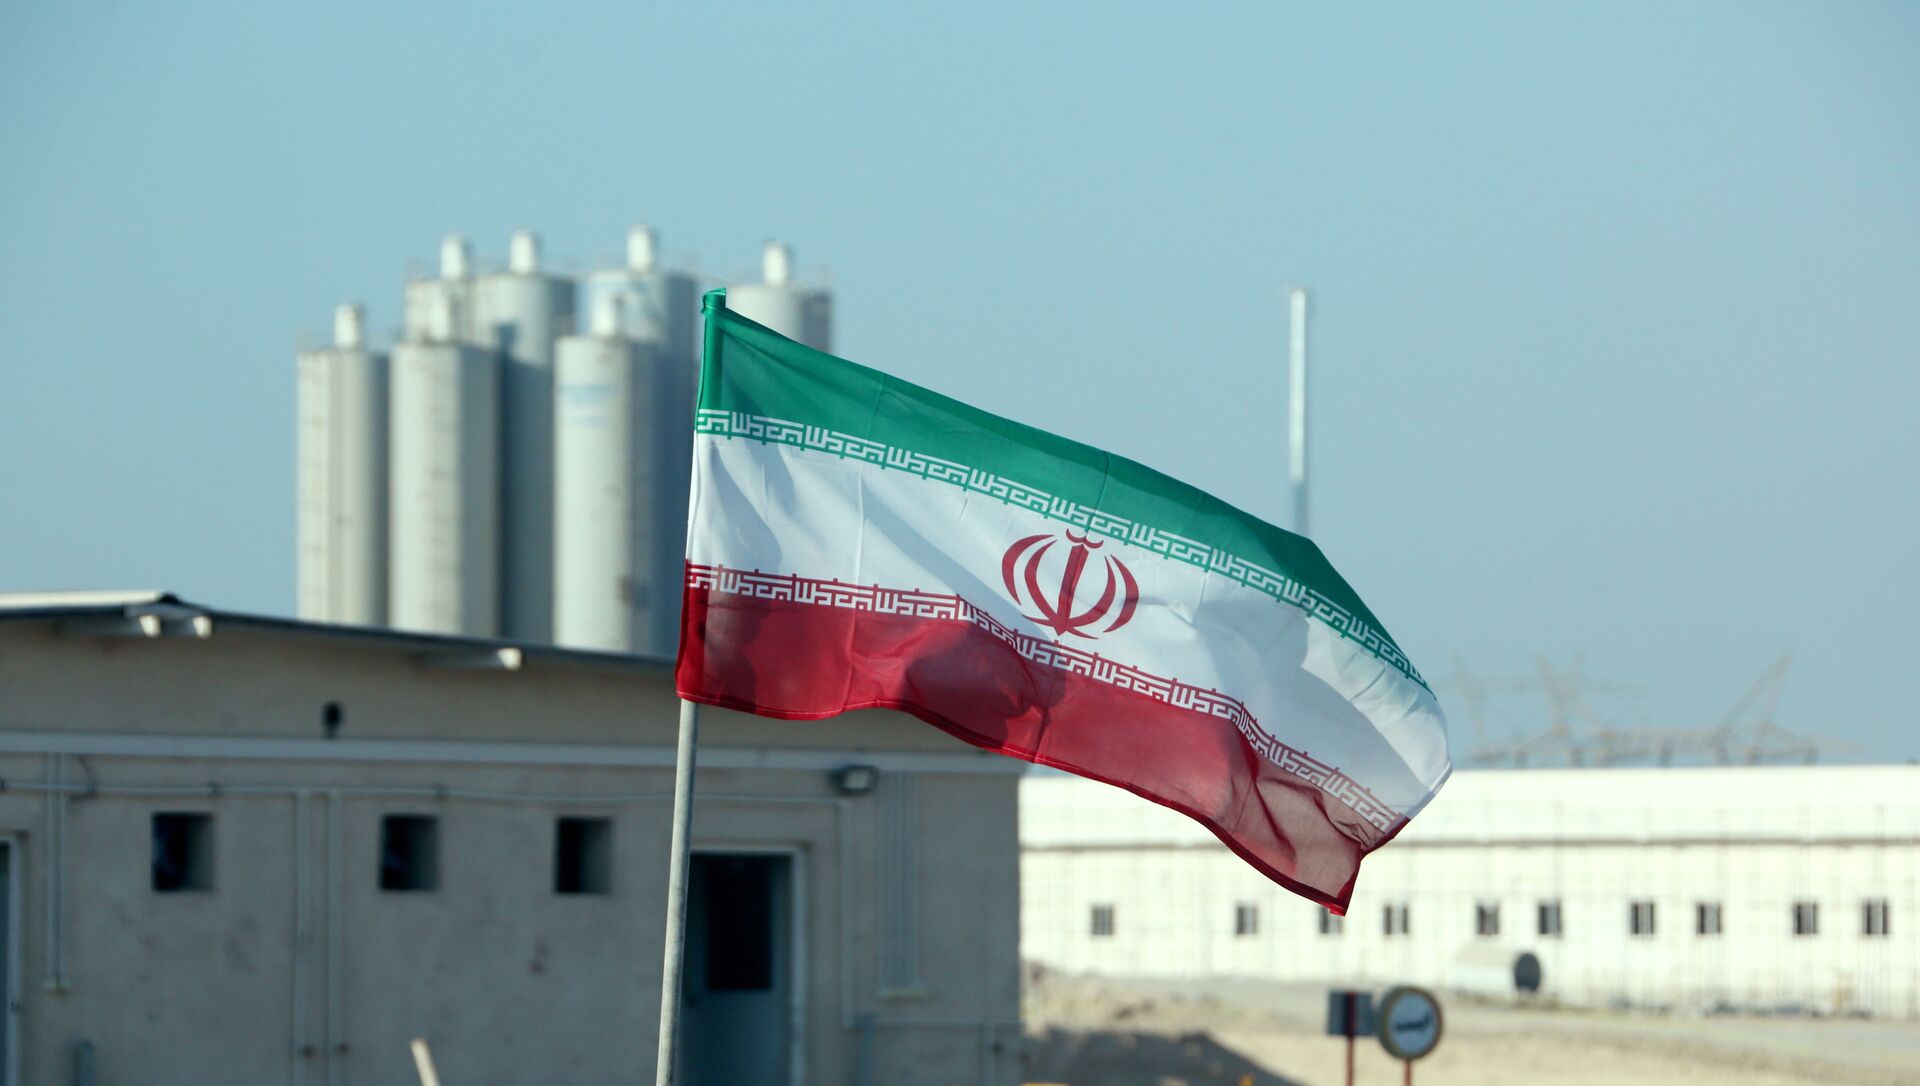 A picture taken on November 10, 2019, shows an Iranian flag in Iran's Bushehr nuclear power plant, during an official ceremony to kick-start works on a second reactor at the facility. - Bushehr is Iran's only nuclear power station and is currently running on imported fuel from Russia that is closely monitored by the UN's International Atomic Energy Agency. - Sputnik International, 1920, 08.02.2021